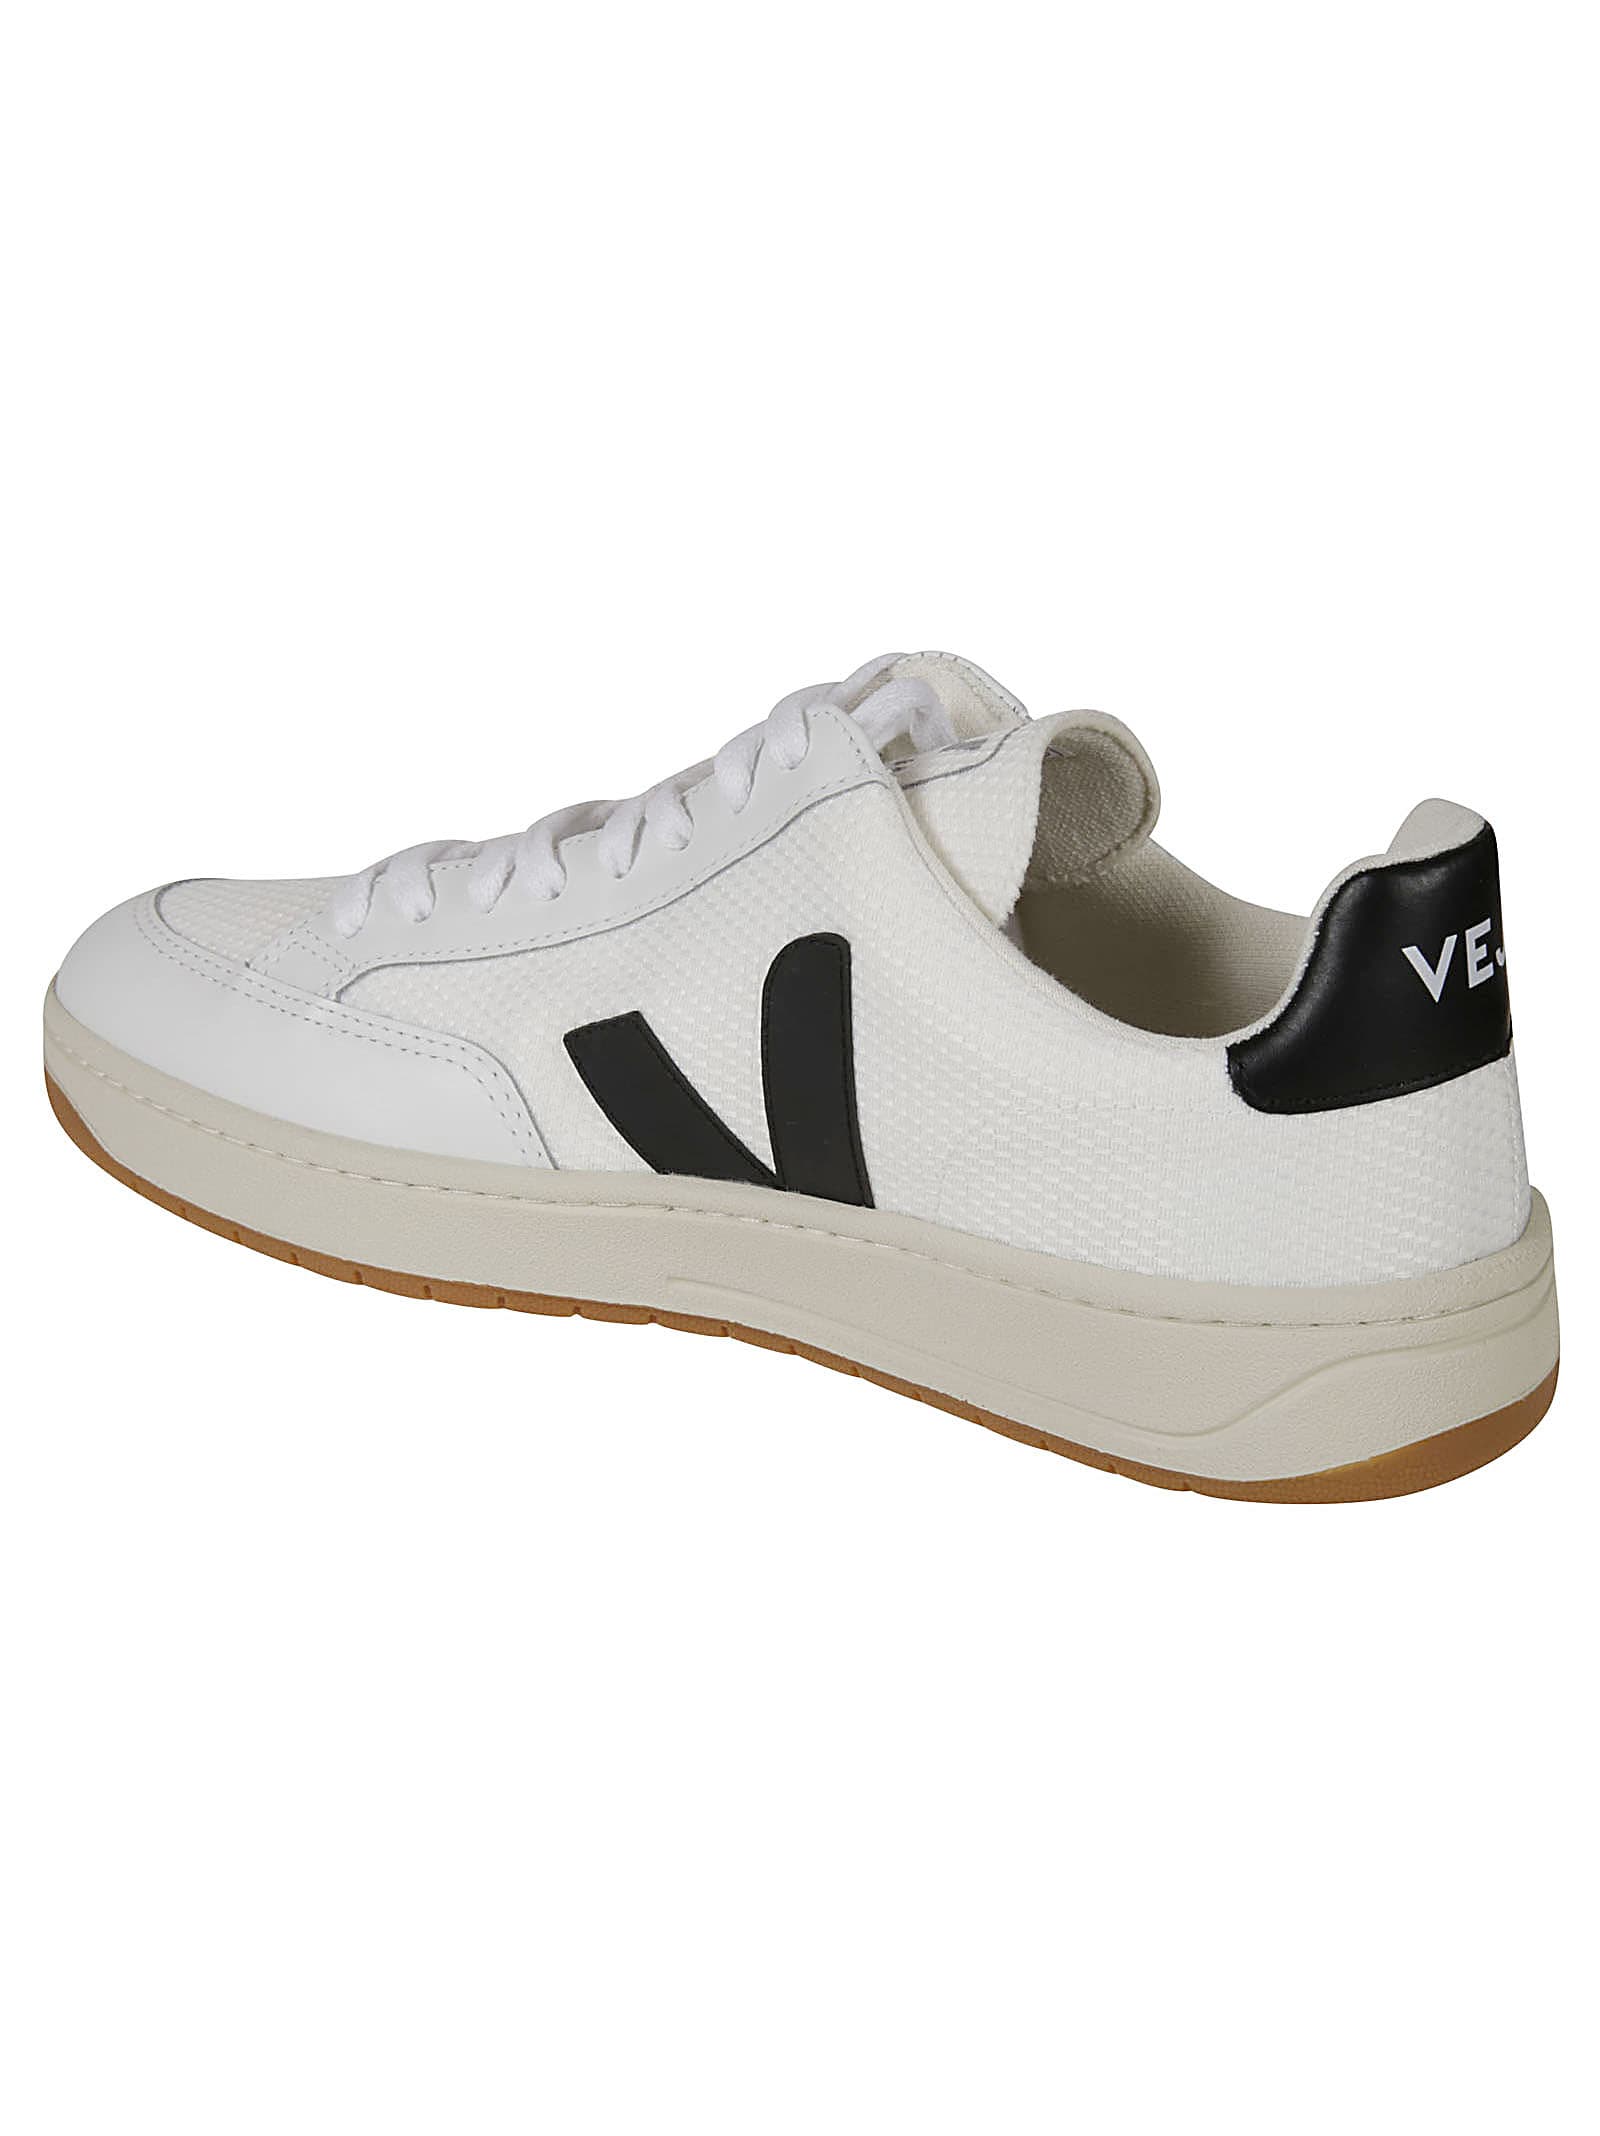 sneakers with v on side